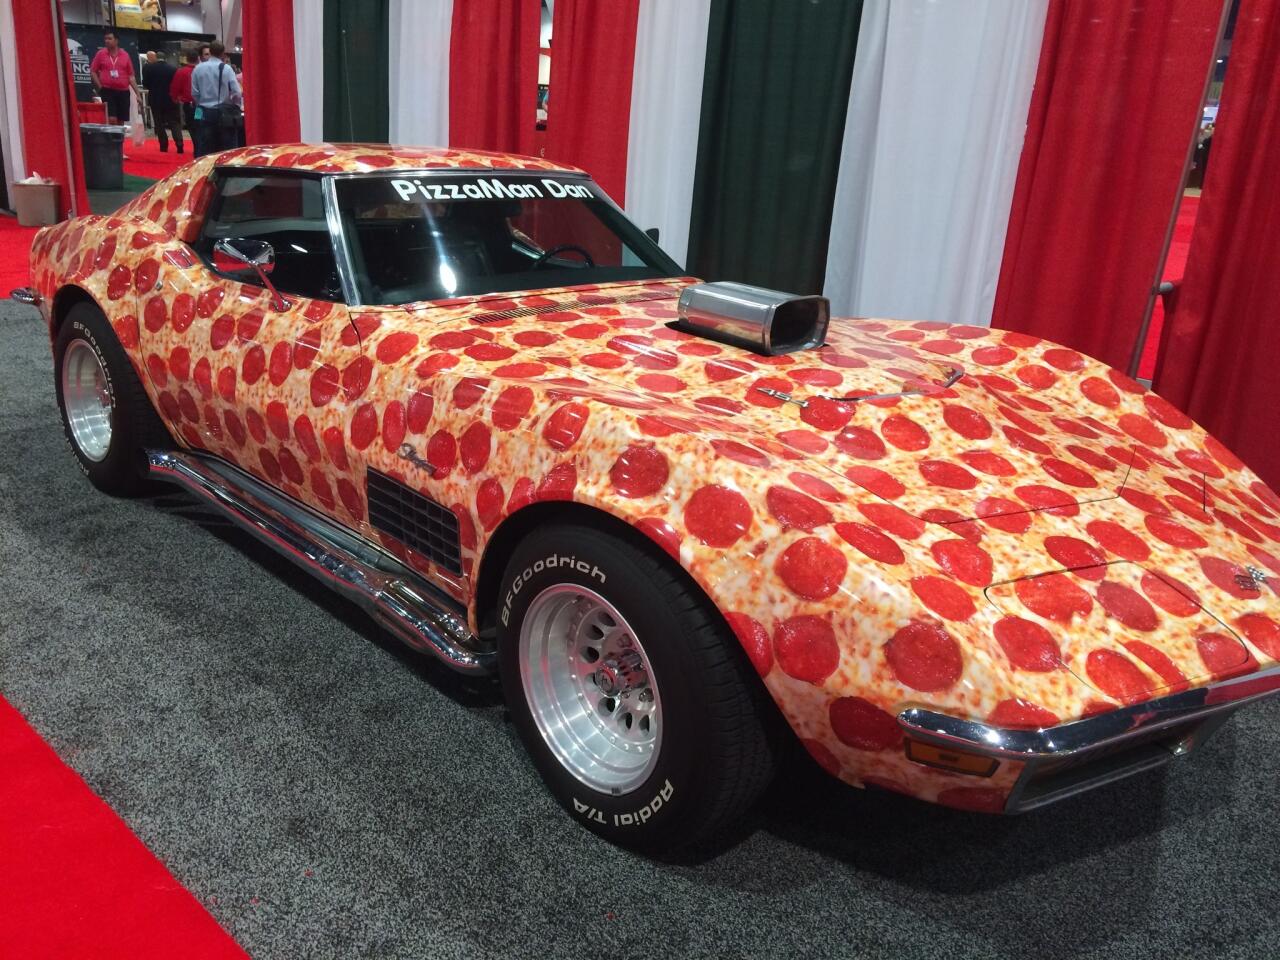 Dan Collier, the owner of the PizzaMan Dan's restaurant chain, had his Corvette on display the International Pizza Expo 2015 in Las Vegas.